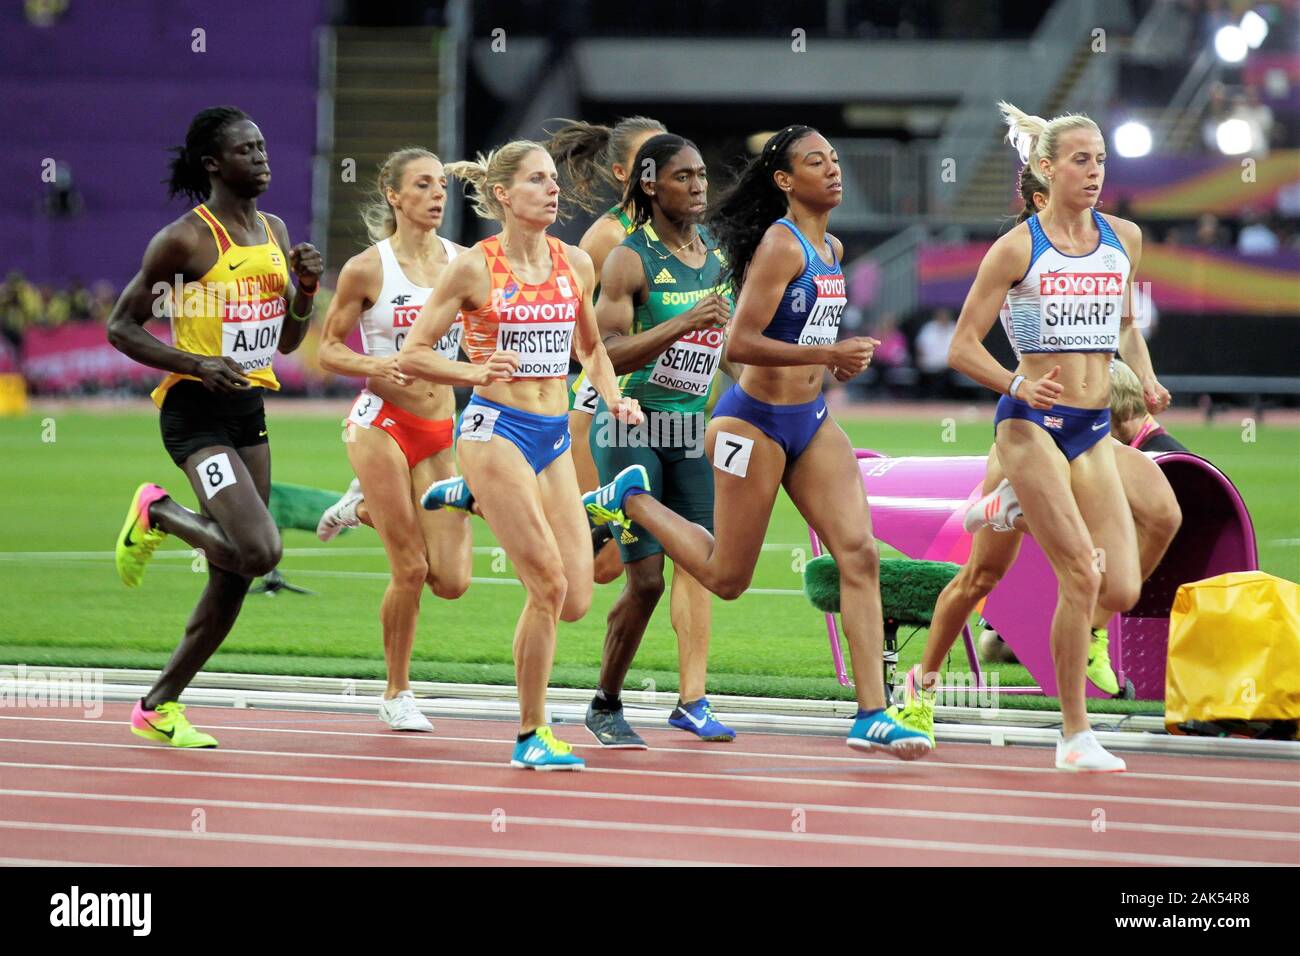 Lynsey Sharp (Great Britain ) , Charlene Lipsey (USA) , Caster Semenya (Afrique du Sud), Angelika Cichocka (Pologne), Docus Ajok (Ouganda)  and Sanne Verstegen-Wolters (Nederlandt) during the 2nd Semi Final 800 m women of the IAAF World Athletics Championships on August 6, 201 at the Olympic stadium in London, Great Britain Photo Laurent Lairys / DPPI Stock Photo